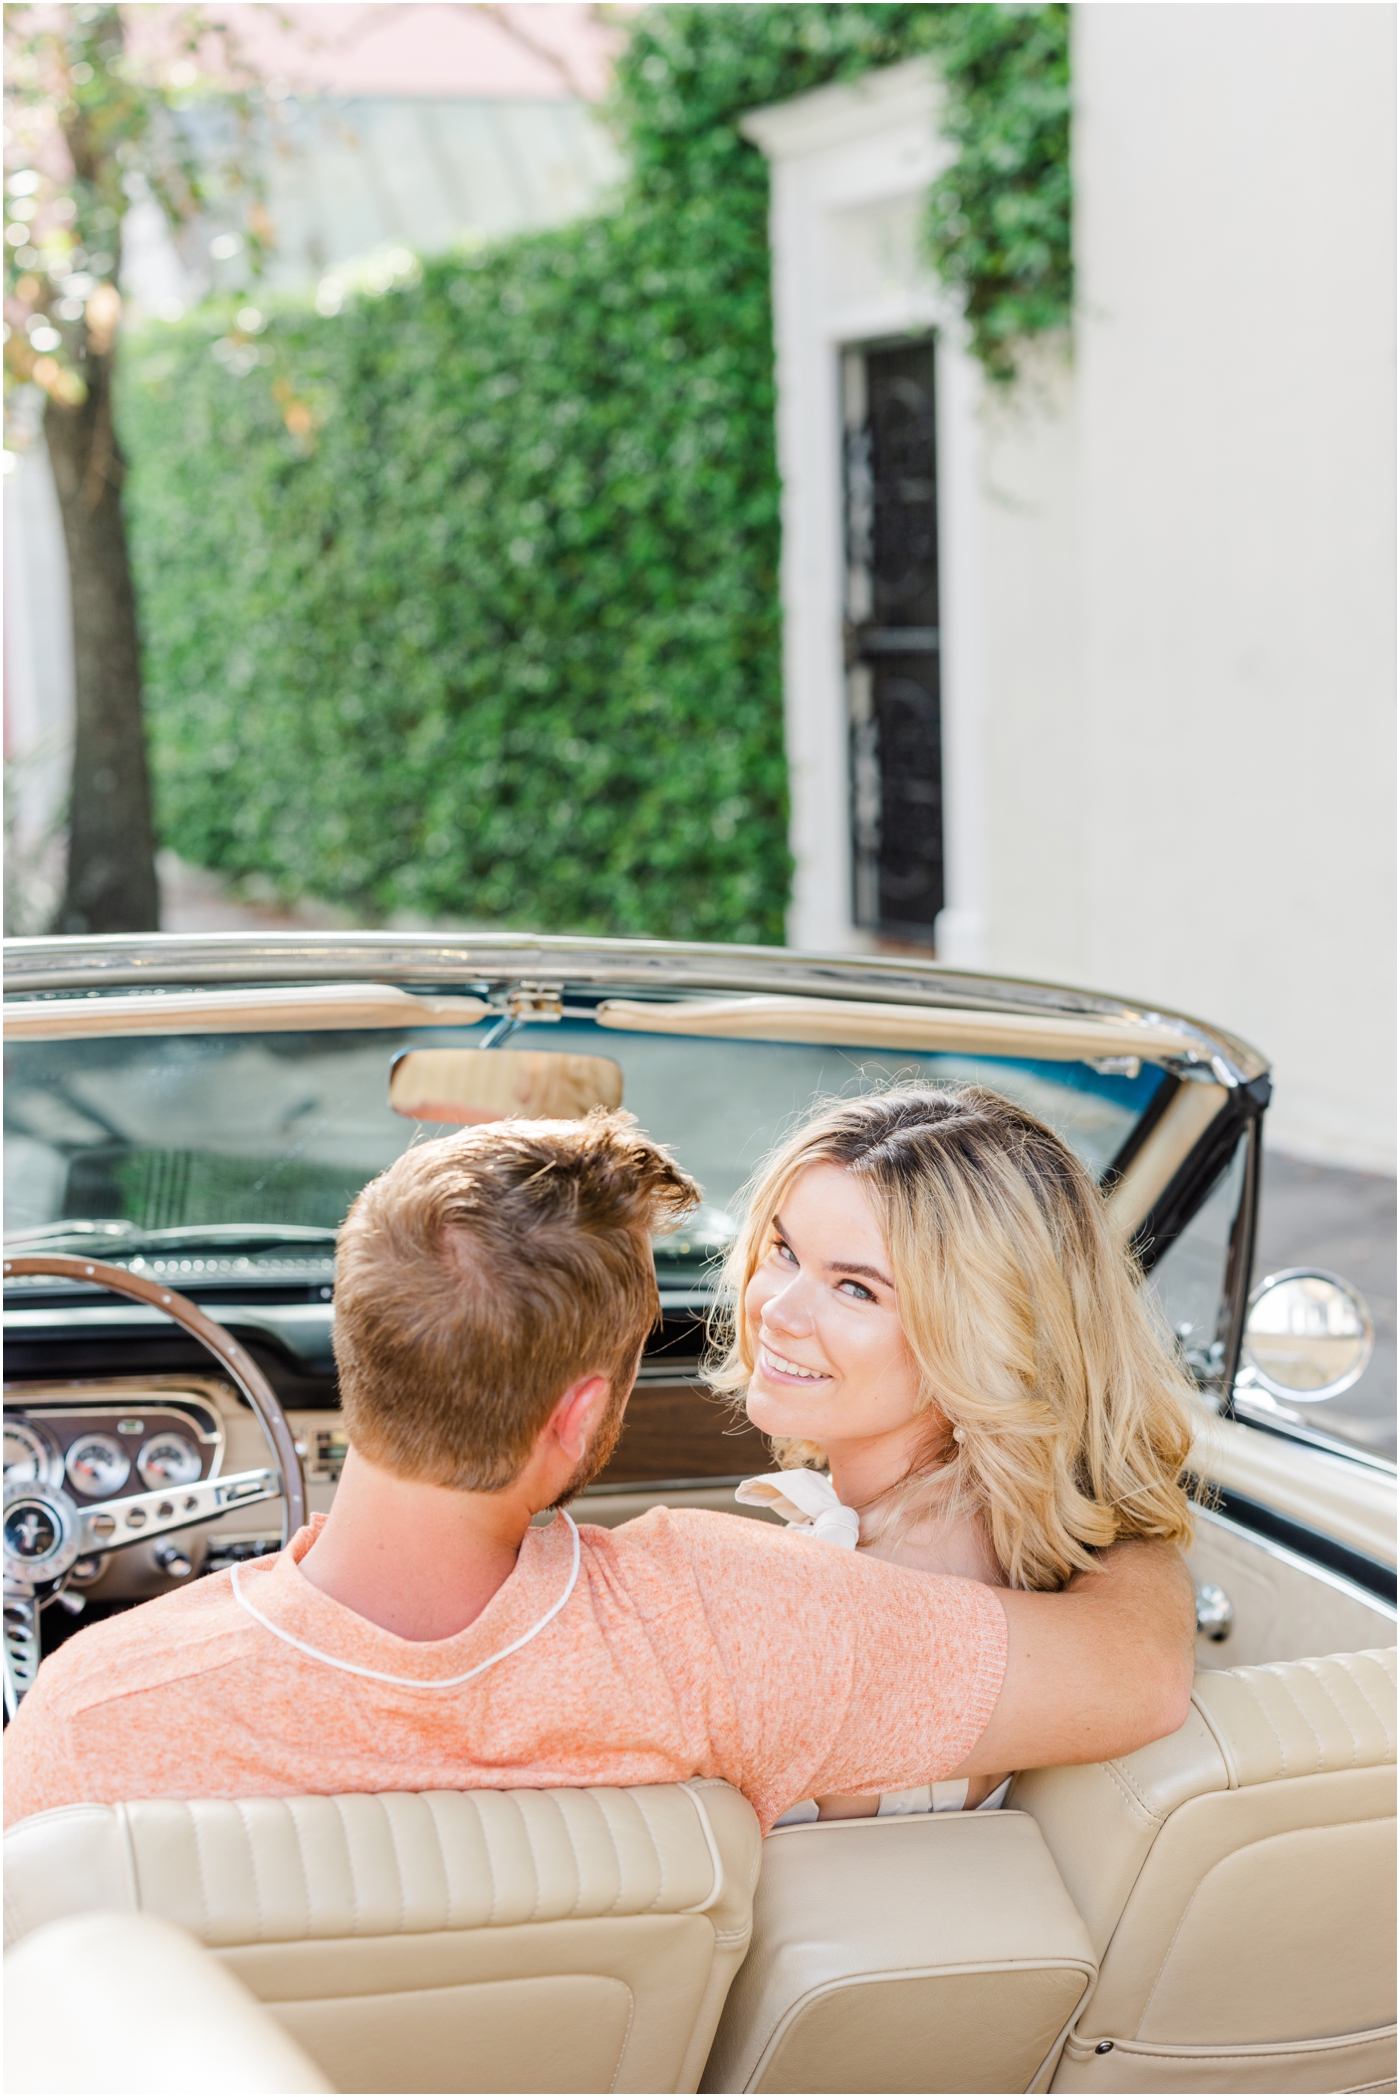 Chalmers St engagement session with vintage car